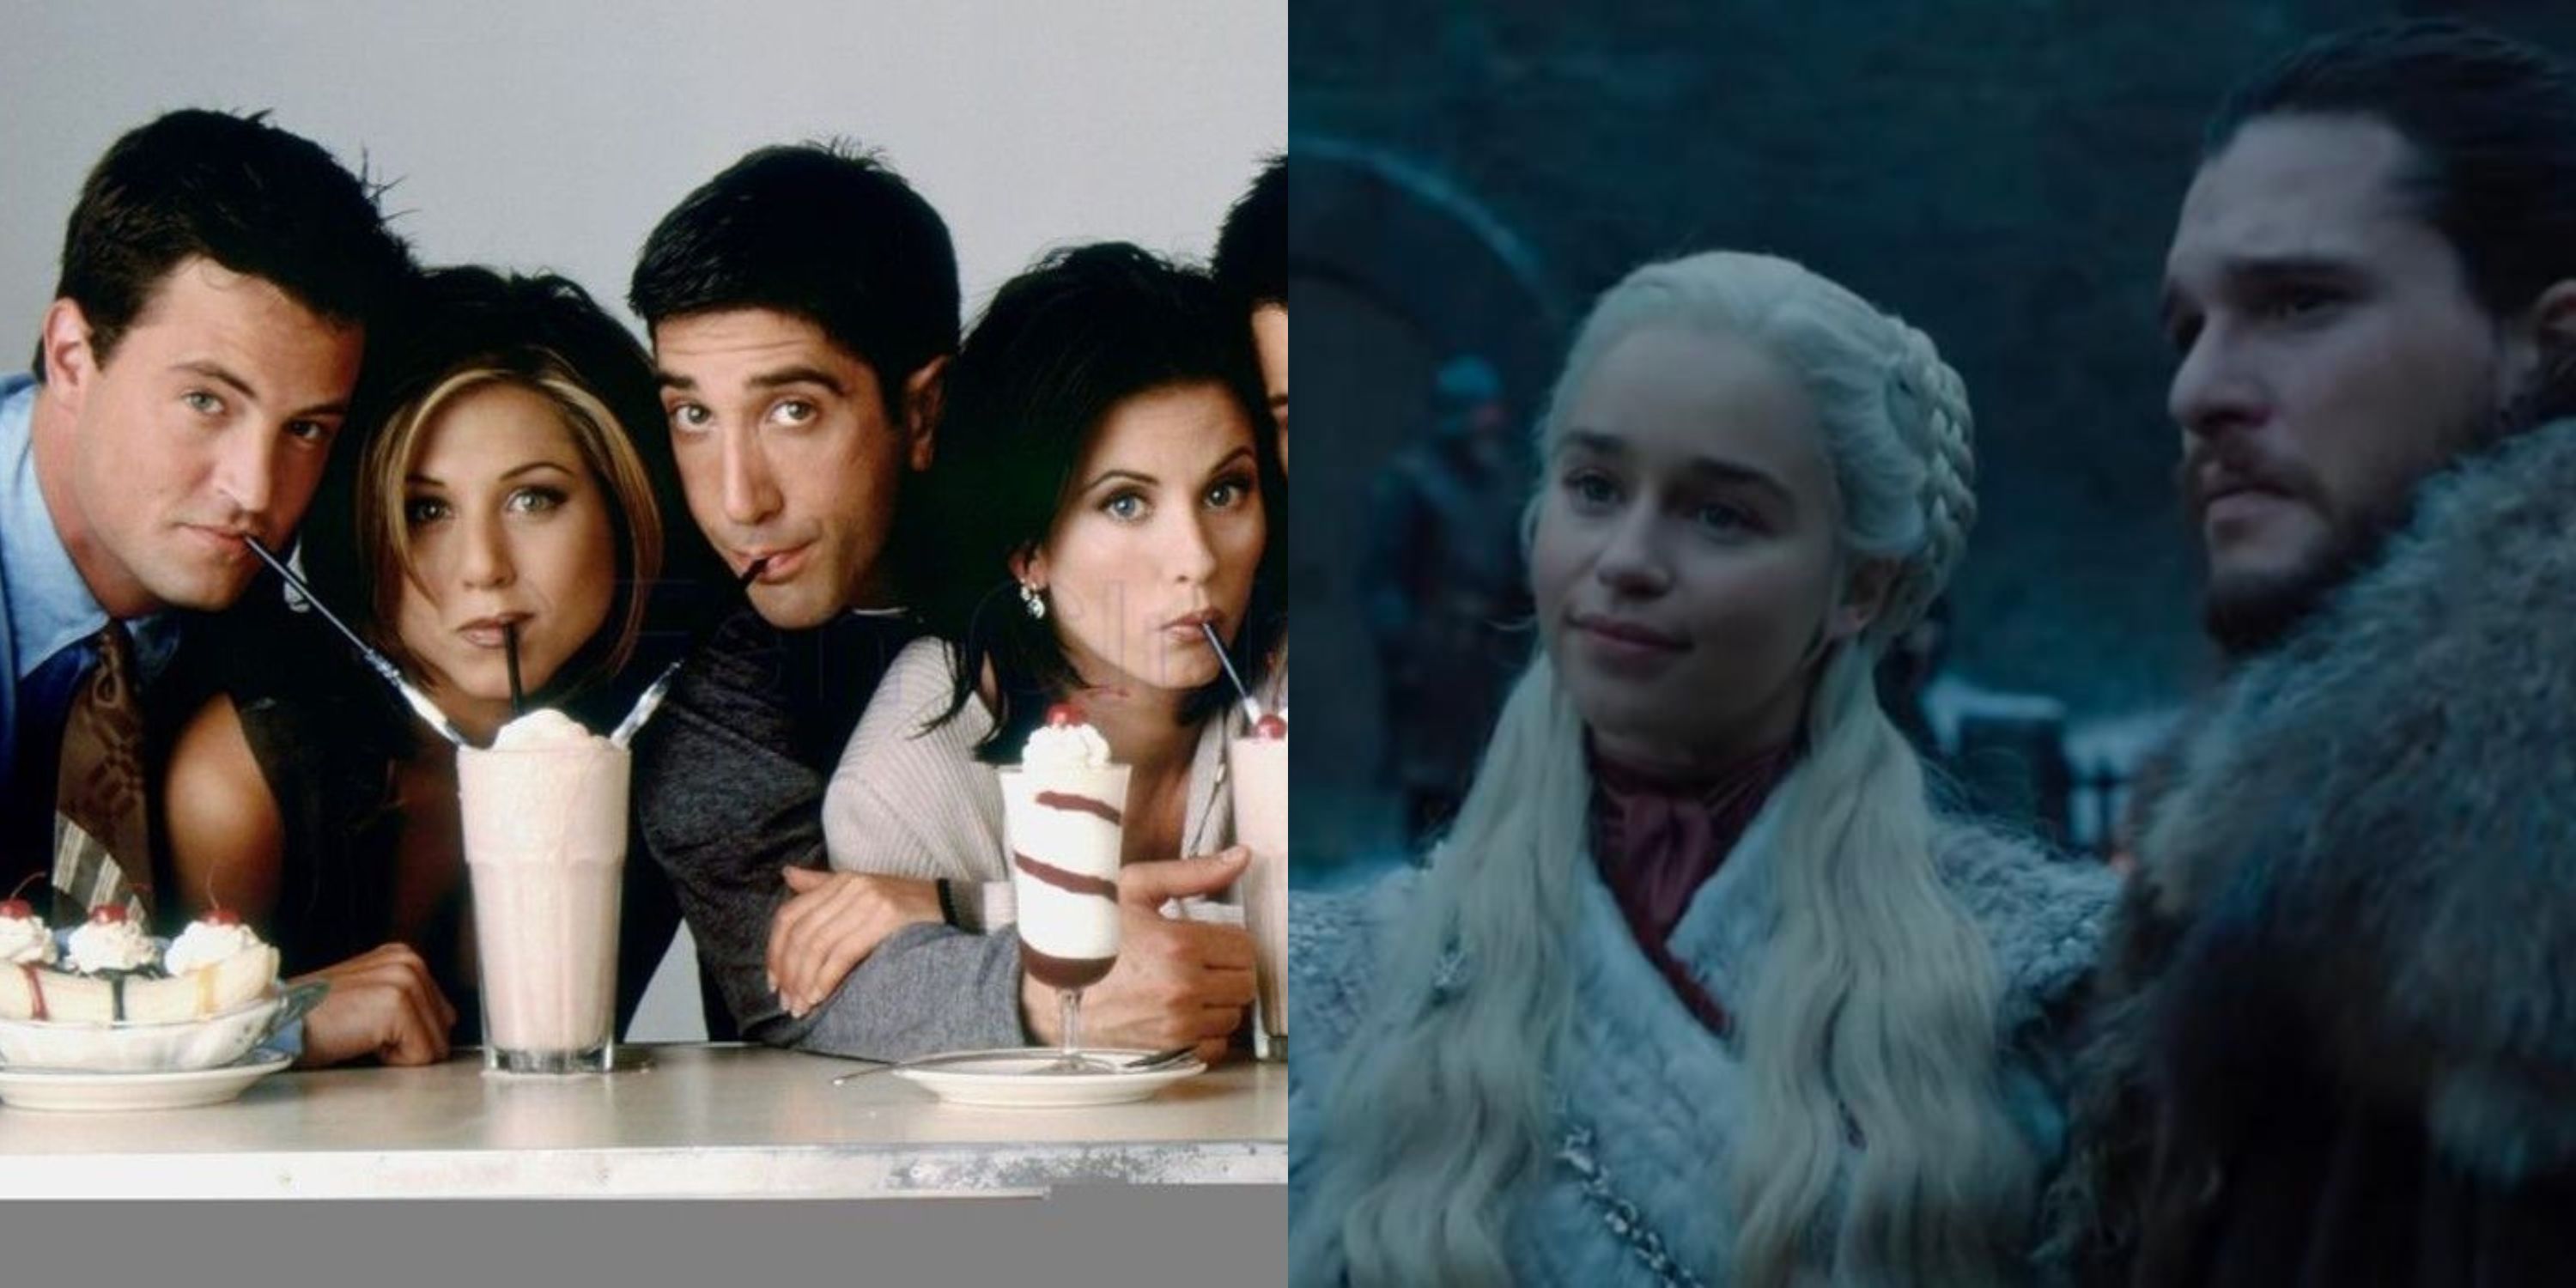 Featured image split the cast of friends drinking milkshake and Kit Harington and Emilia Clarke in Game of Thrones